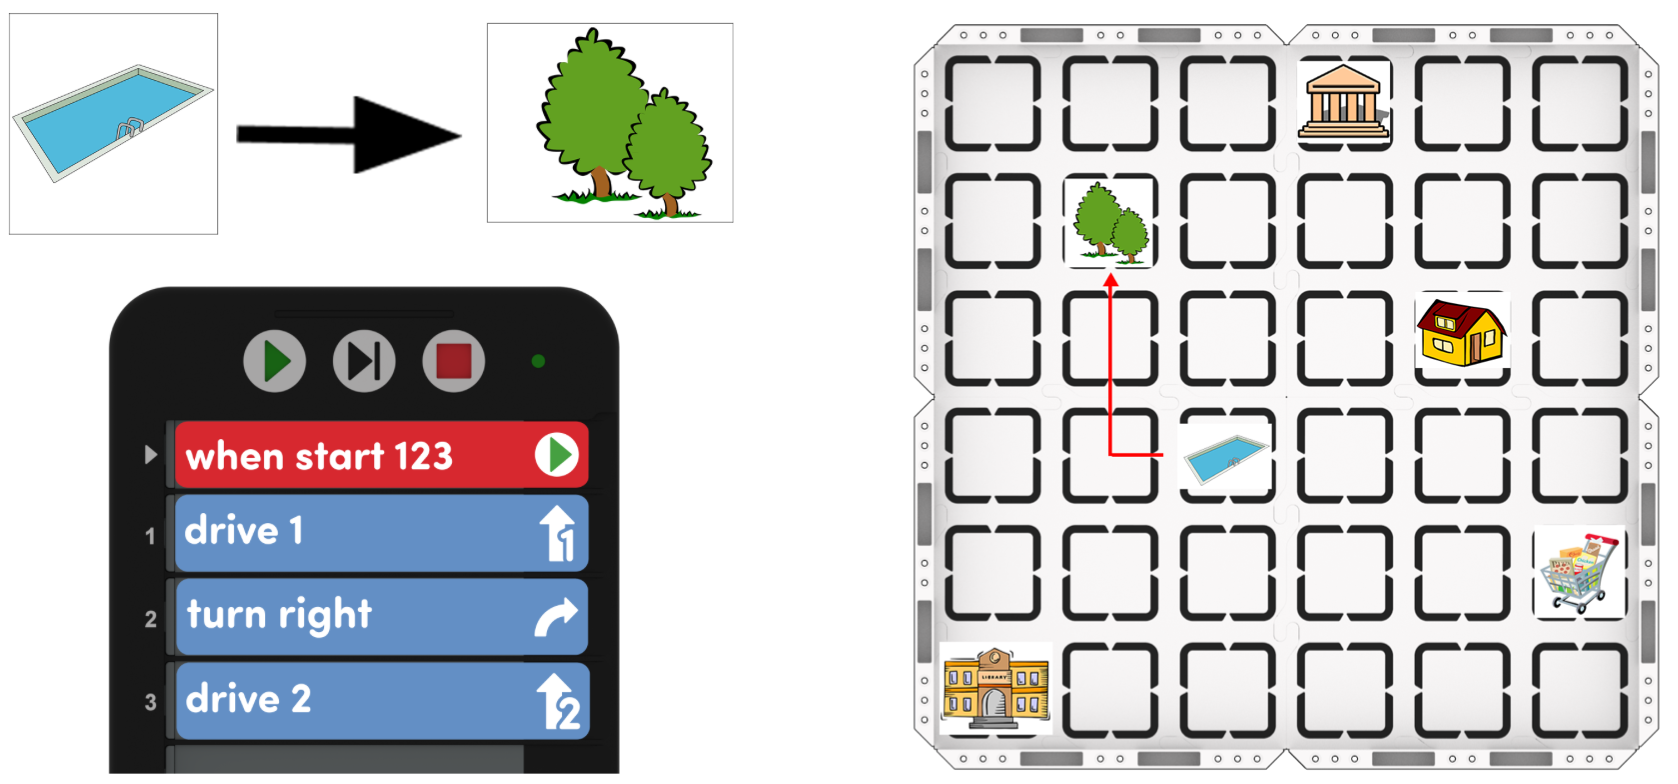 Image of materials for creating a new map challenge: map prompt, Coder and Coder cards, and an image of a map set up on a 123 Field